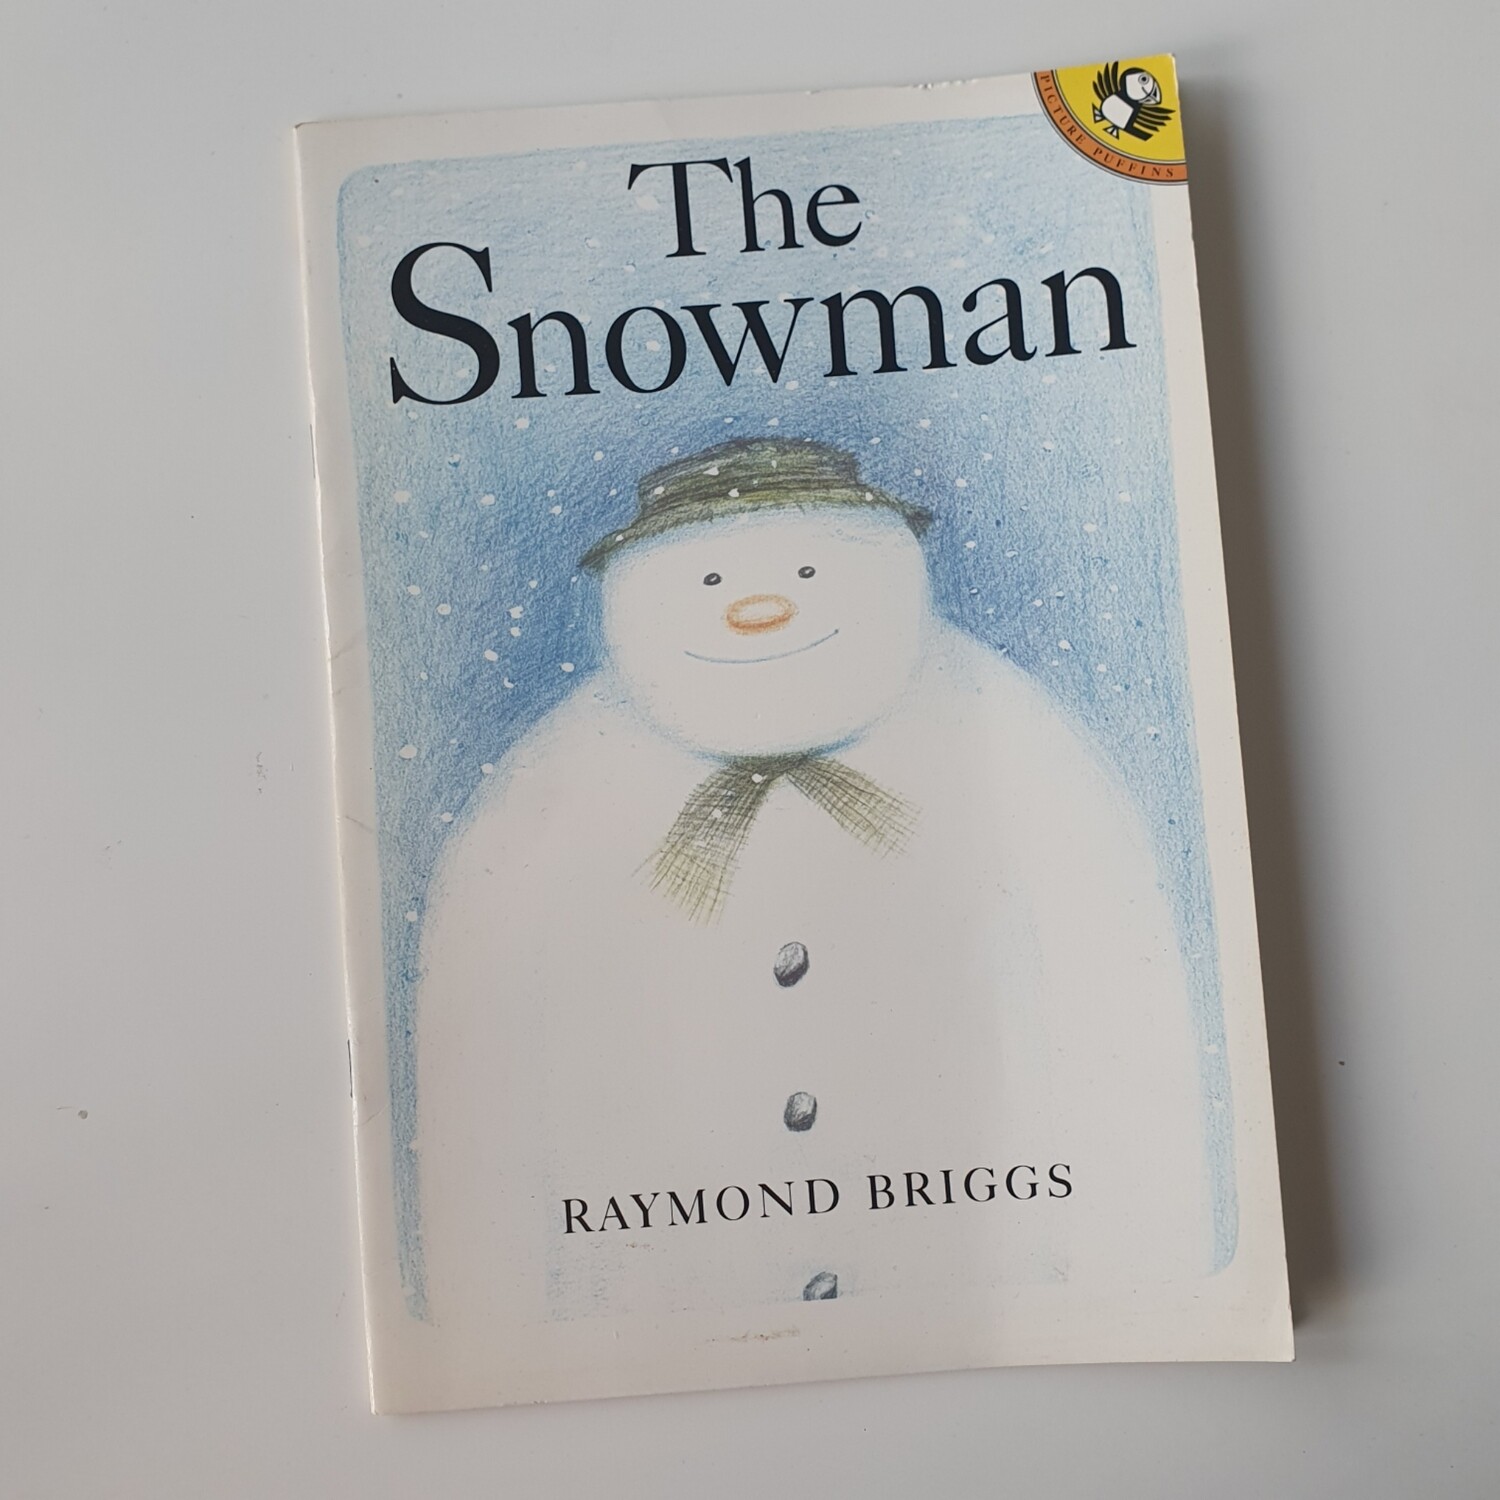 The Snowman Notebook - made from a paperback book